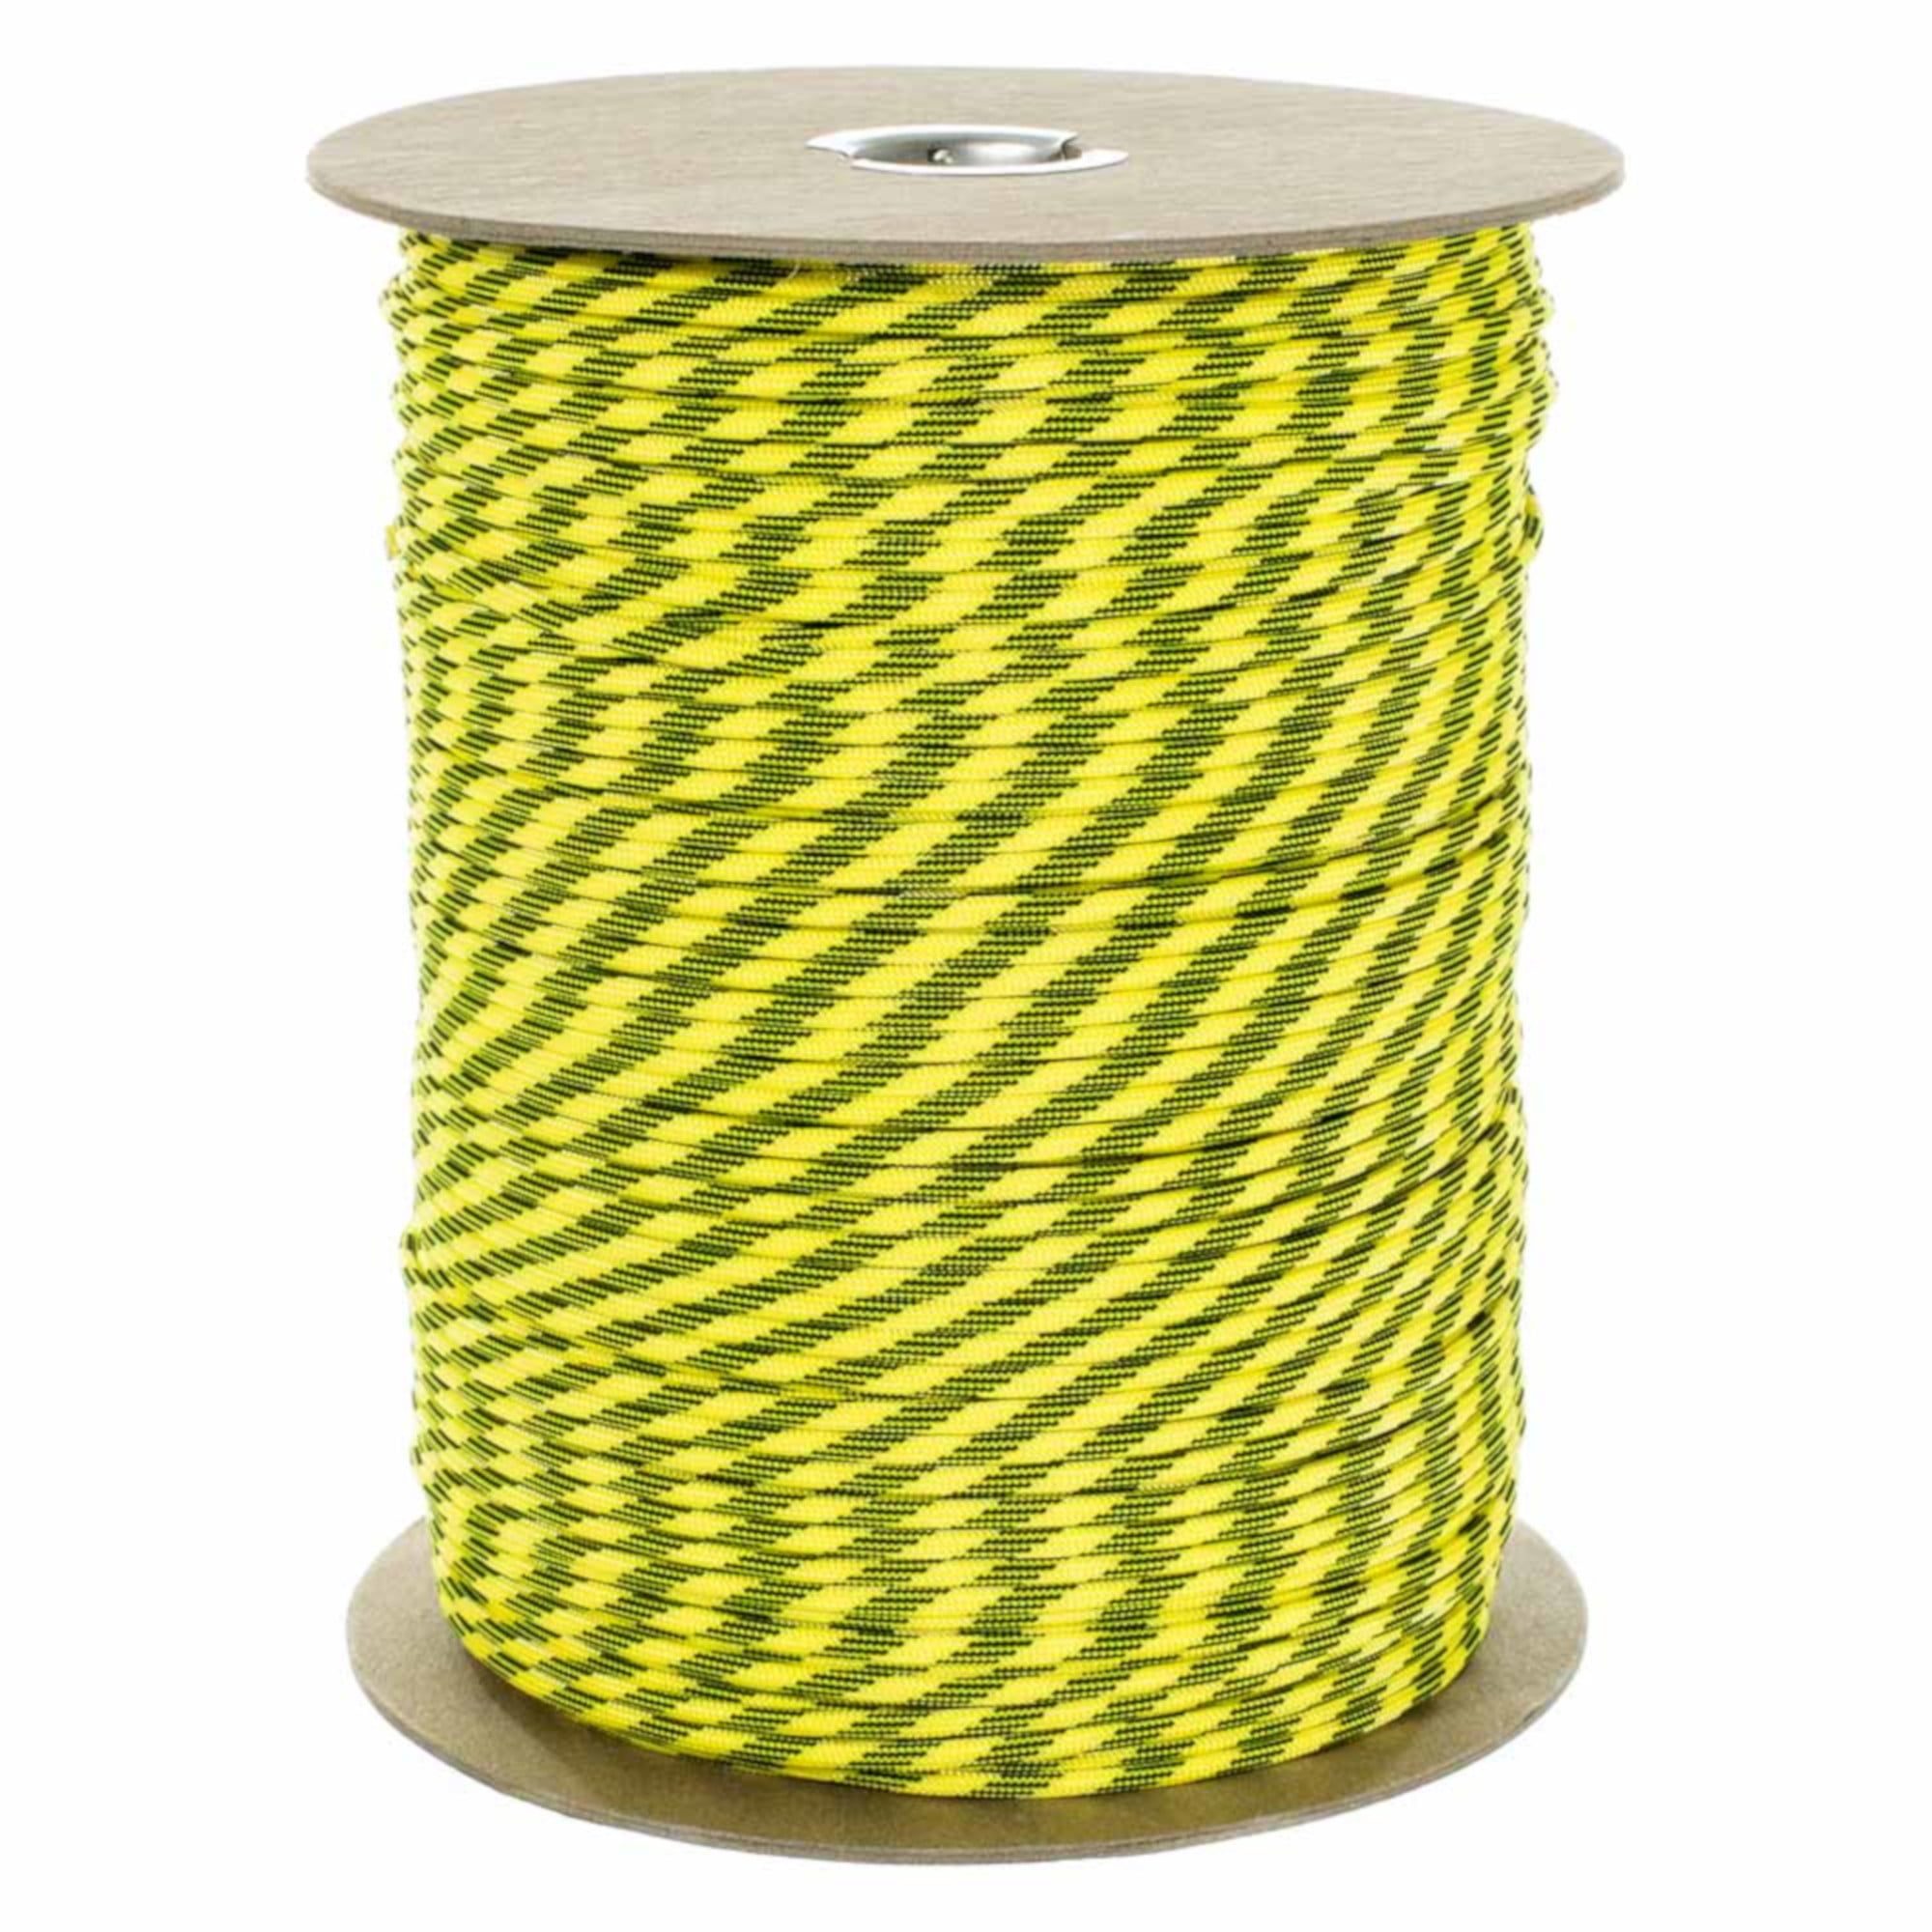 PARACORD PLANET Reflective Paracord Made of 100% Nylon with 7 Inner-Core Strands Available in 10 50 25 100 Foot Lengths That is Made in The USA 